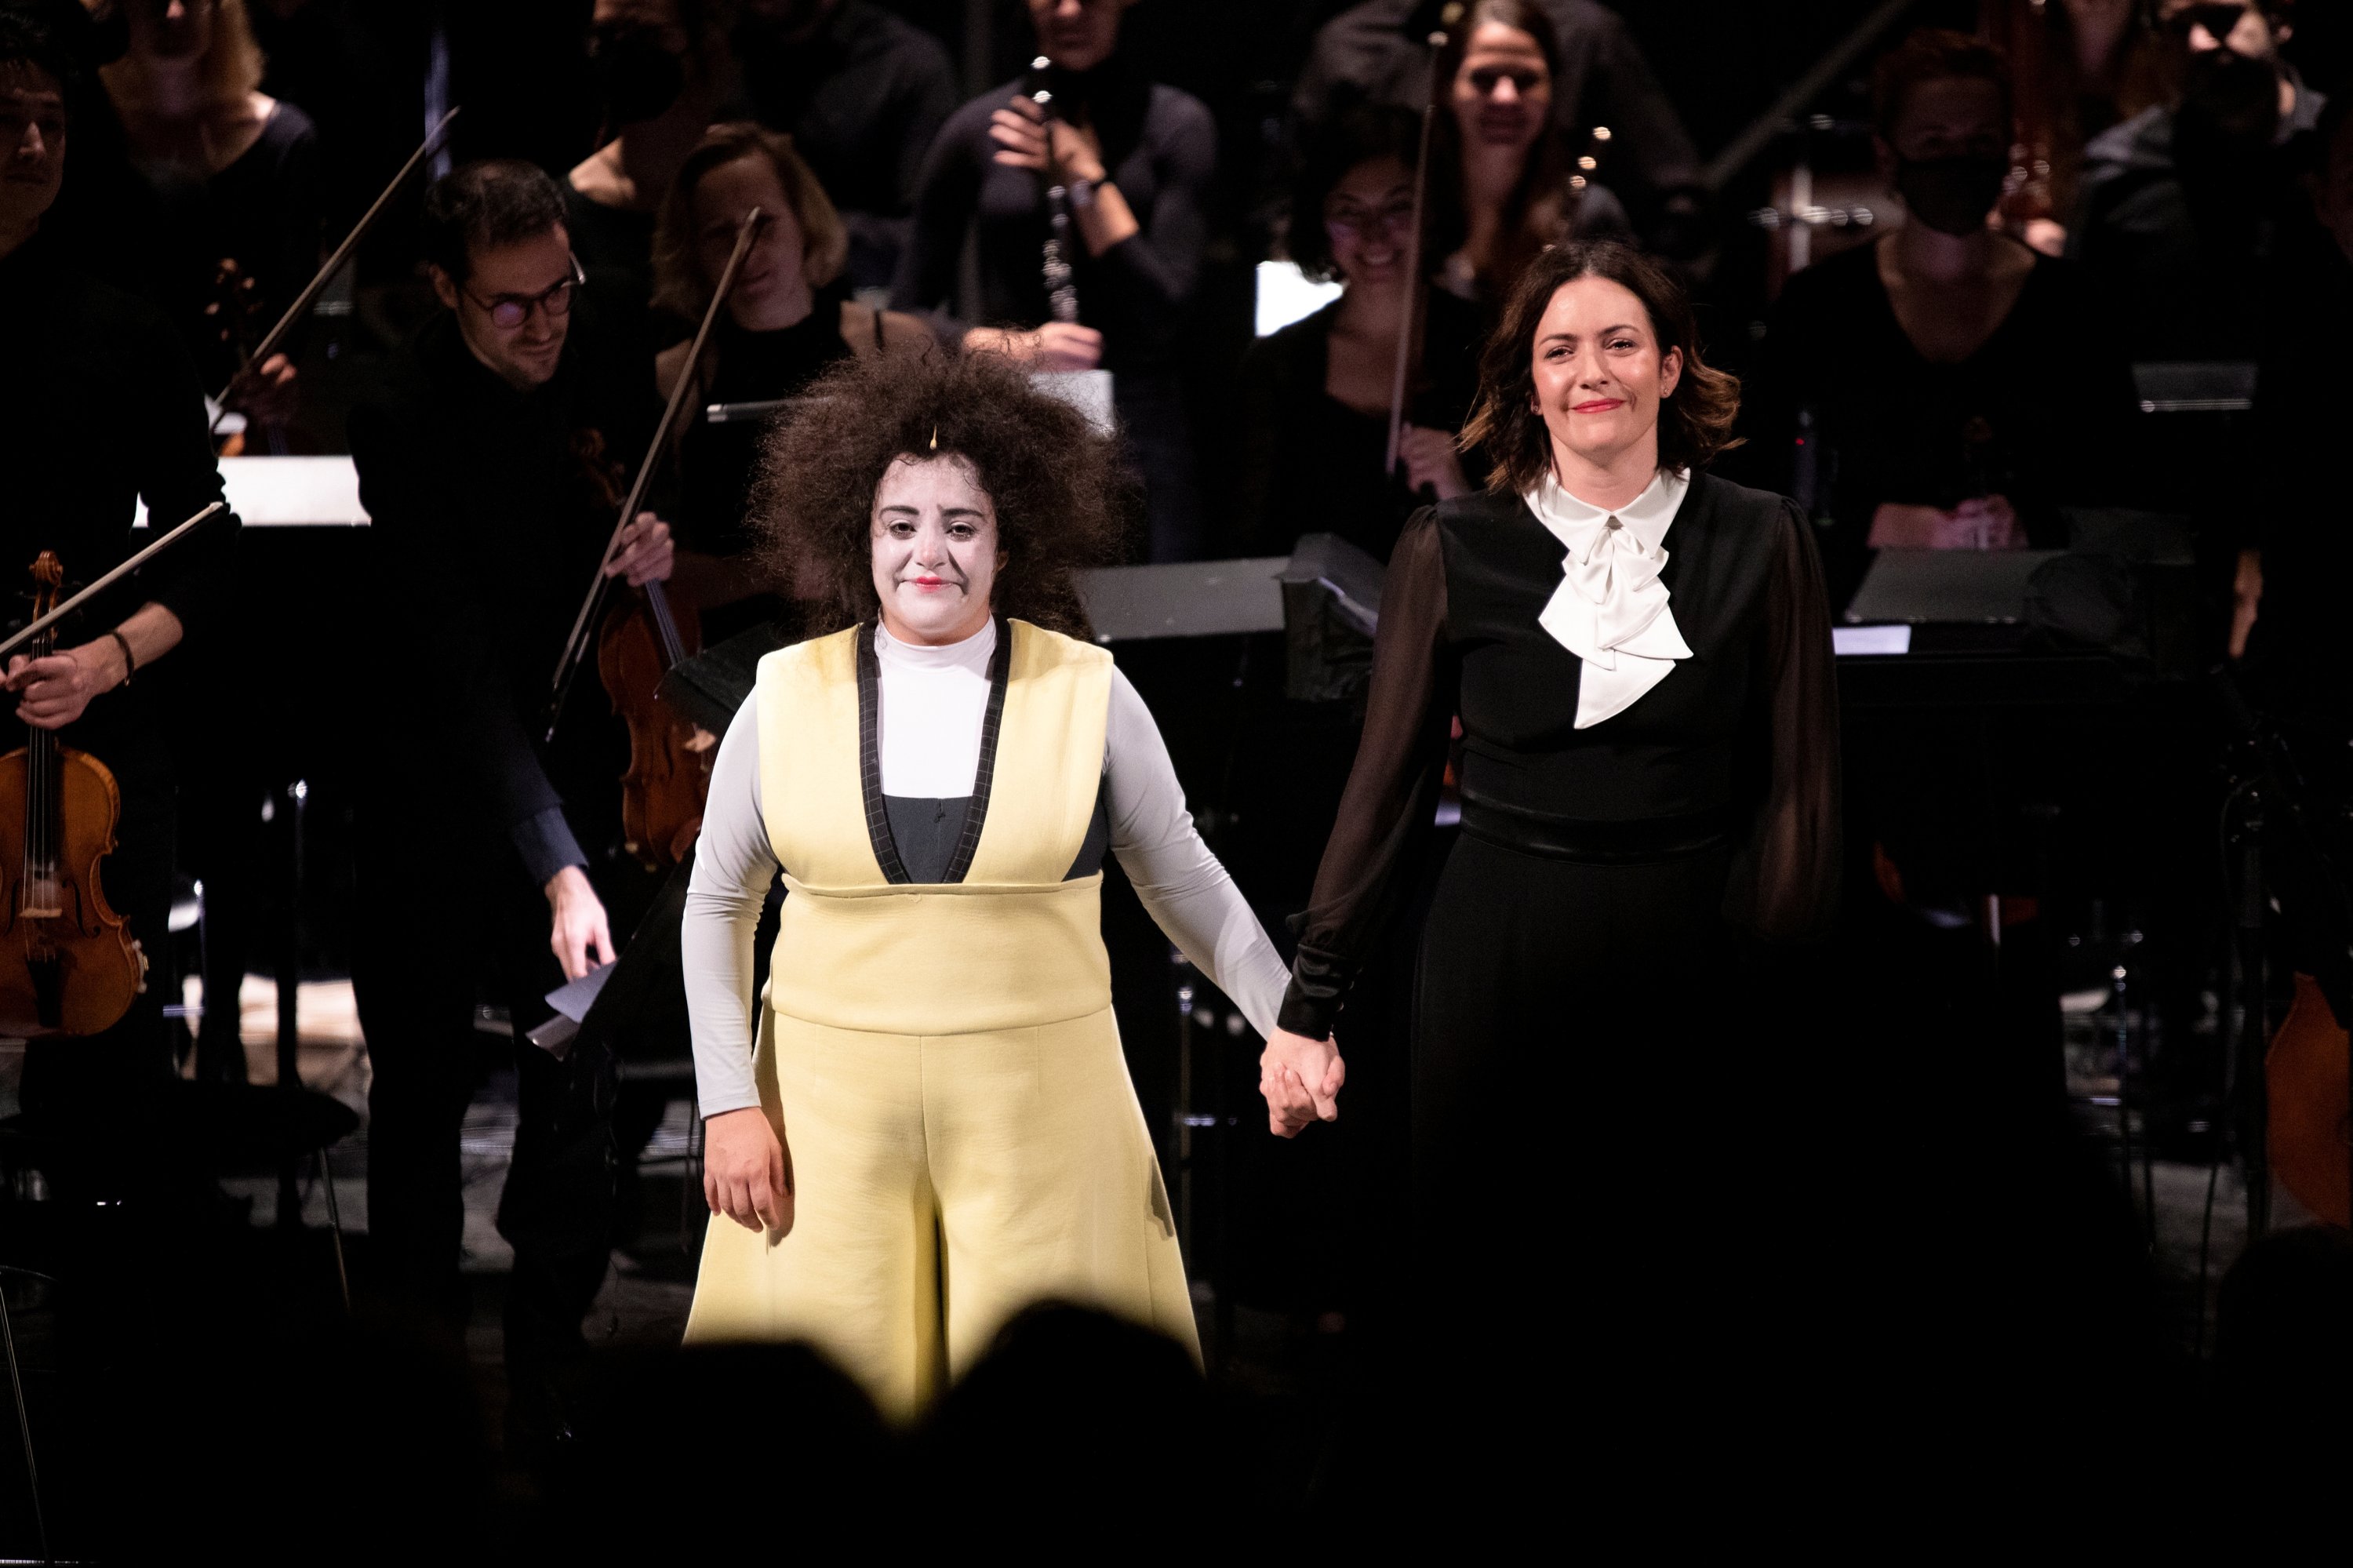 Clown performer Gabriela Munoz and conductor Alondra de la Parra stand in front of audience following a preview performance of "The Silence of Sound" in Girona, Spain, on Nov. 25, 2021. (REUTERS)